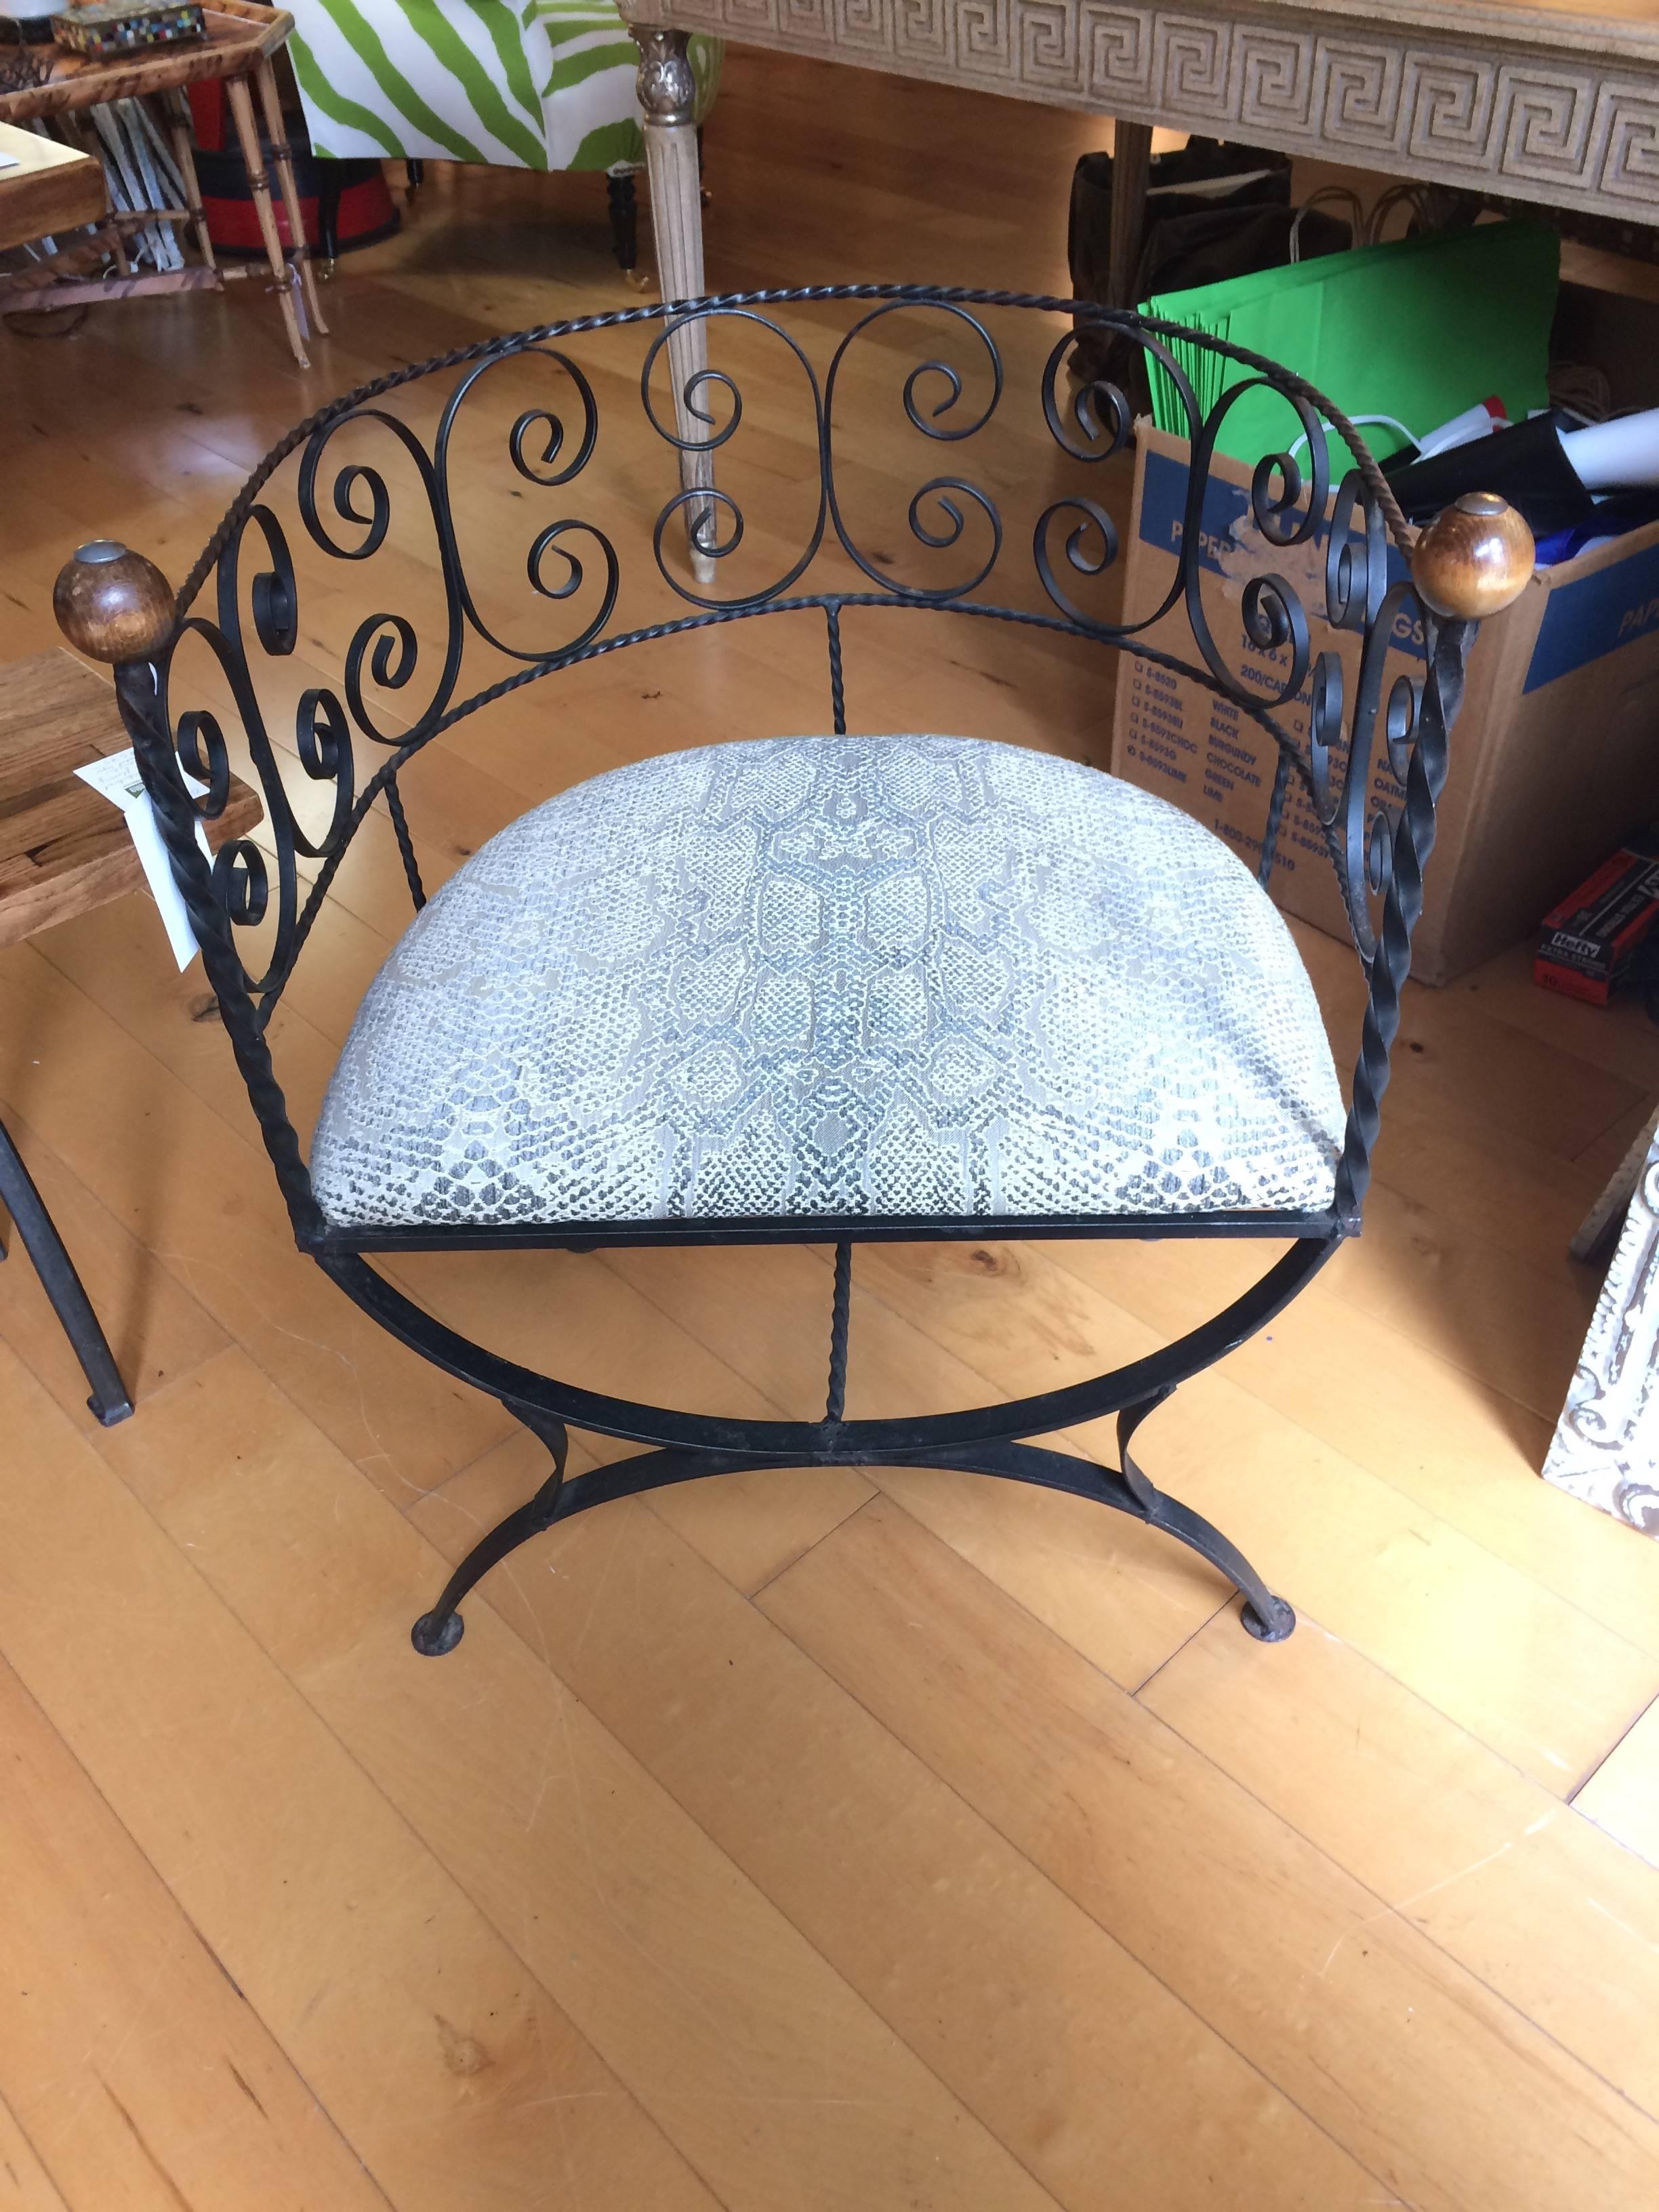 Lovely and unusual pair of barrel shaped chairs having airy wrought iron frame and wooden ball finials on the ends. Cushion is Cowtan & Tout faux snakeskin pattern.